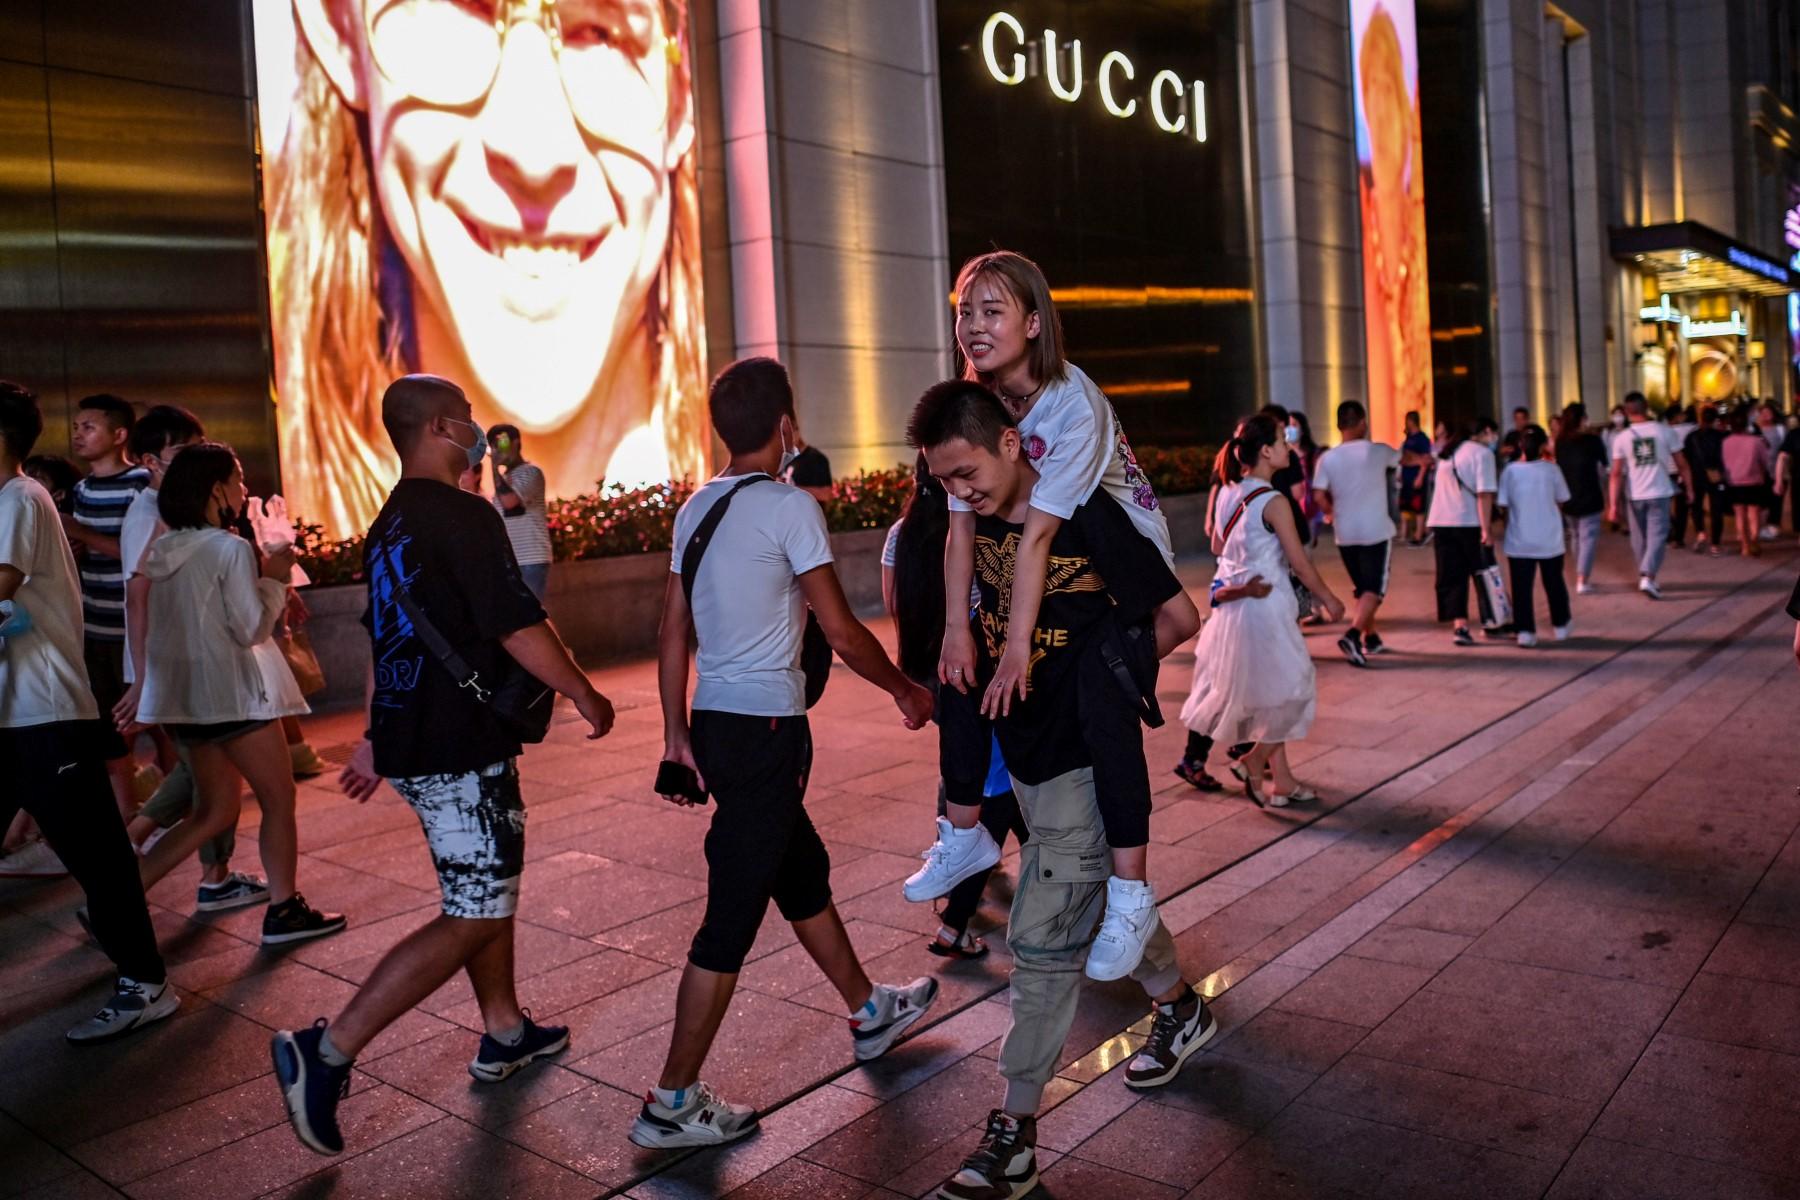 A man carries a woman piggyback on a street surrouned by shops and malls in Shanghai on July 31, 2020. Photo: AFP